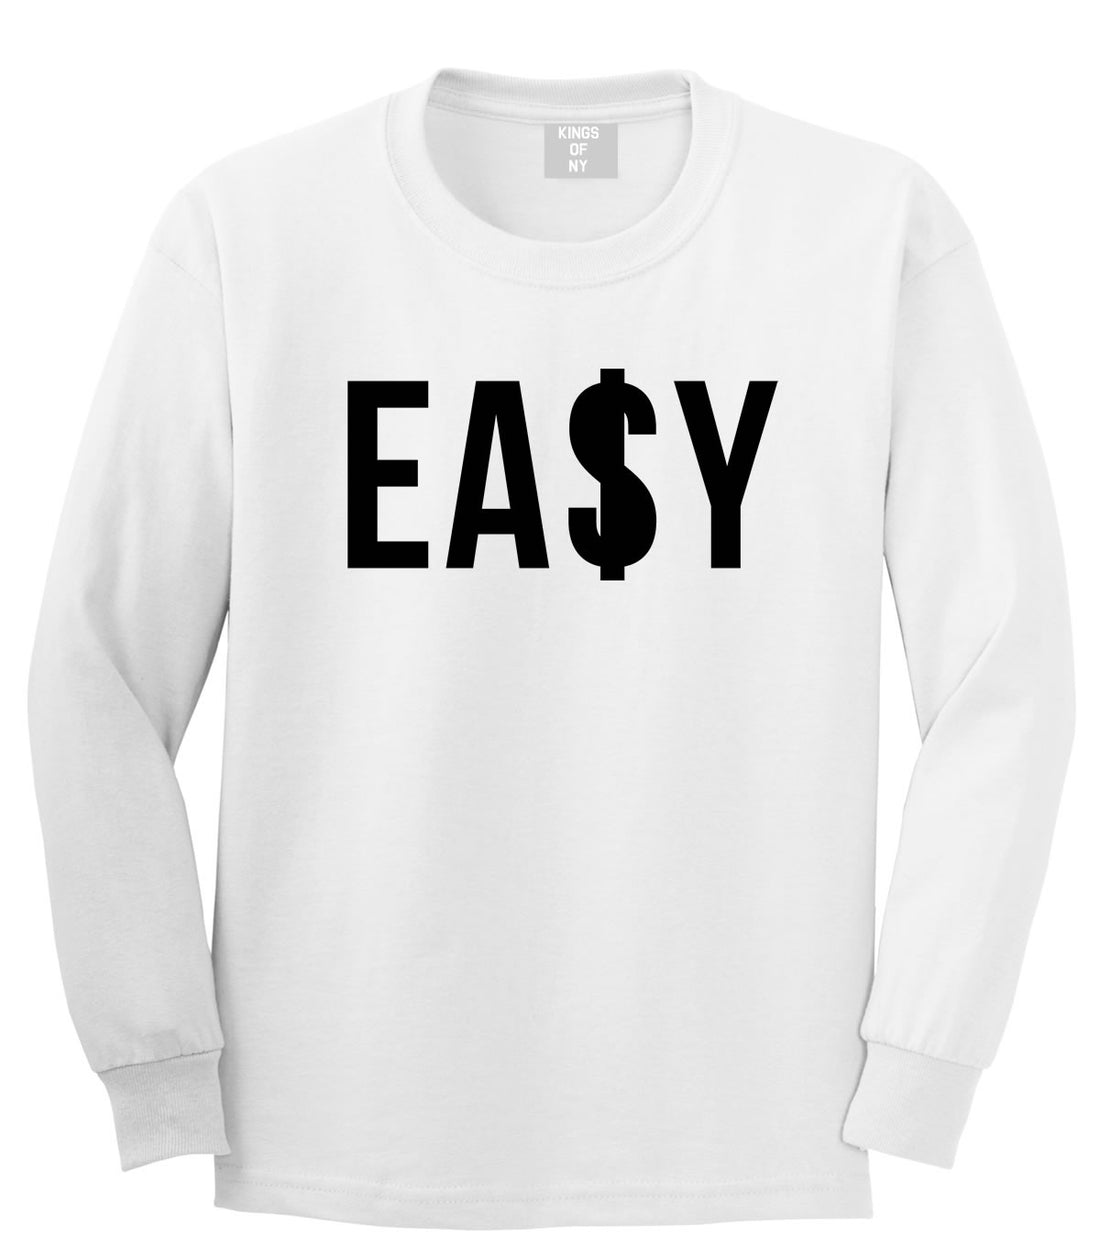 Easy Money Big High Dope Cool Black by Kings Of NY Long Sleeve T-Shirt in White by Kings Of NY